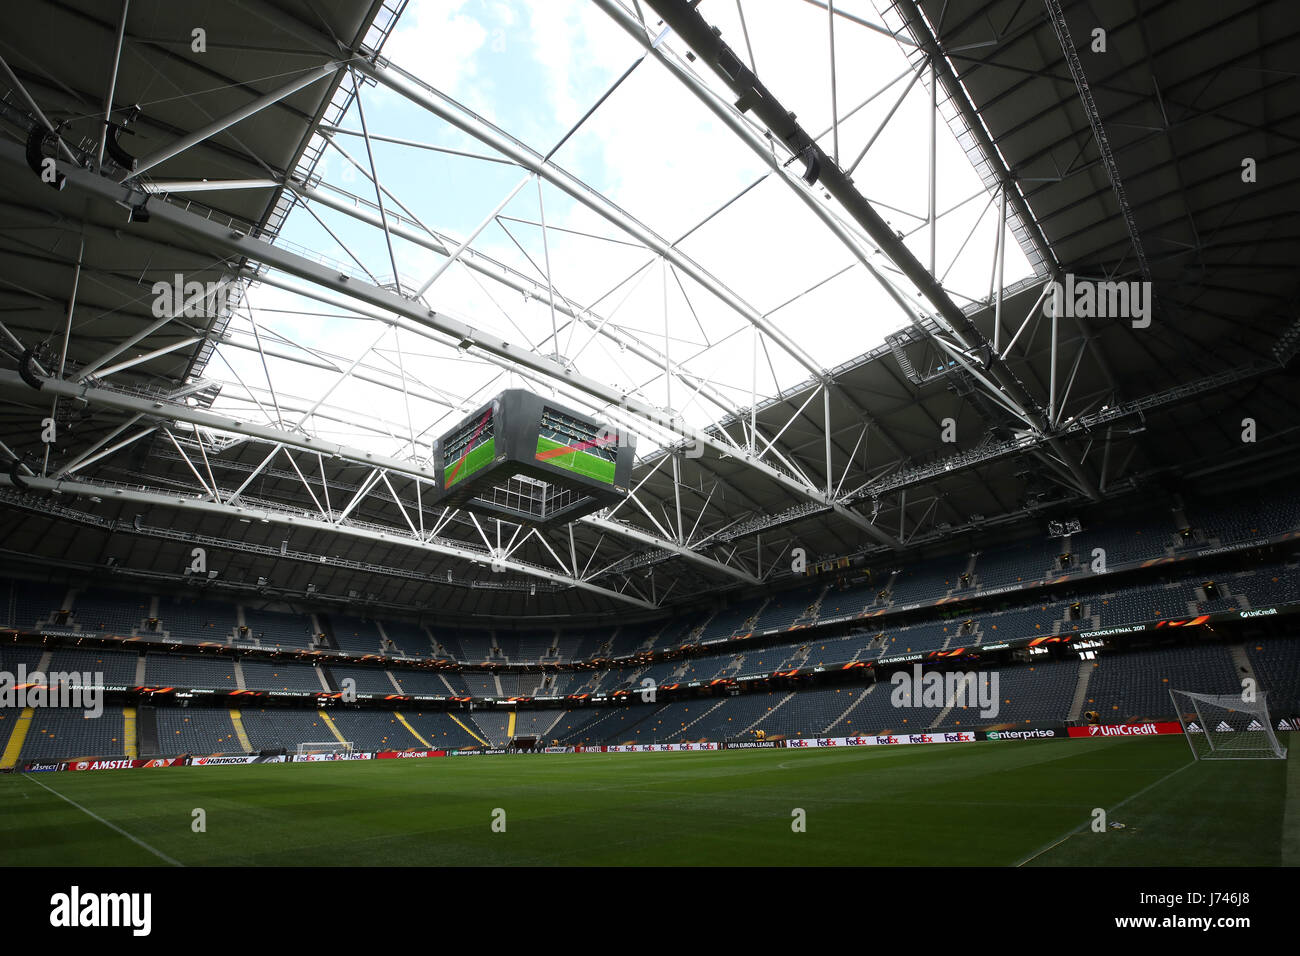 A general view of the Friends Arena, Stockholm, in Sweden, ahead of the Europa League Final against Ajax tomorrow evening. PRESS ASSOCIATION Photo. Picture date: Tuesday May 23, 2017. Photo credit should read: Nick Potts/PA Wire Stock Photo